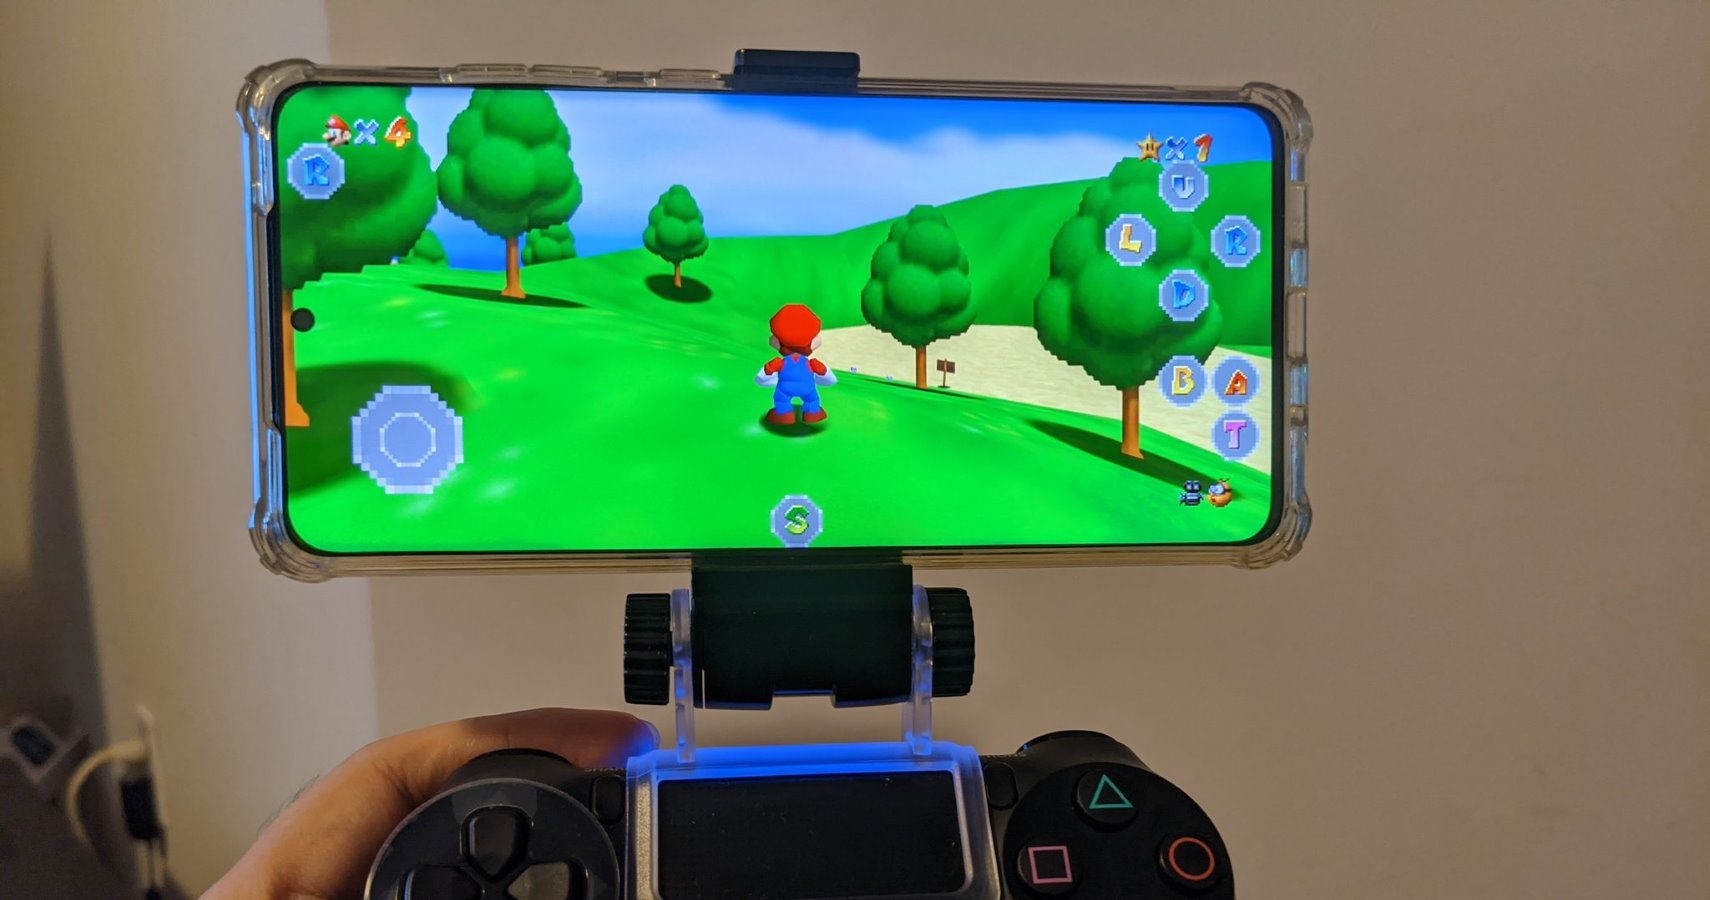 mario 64 on android